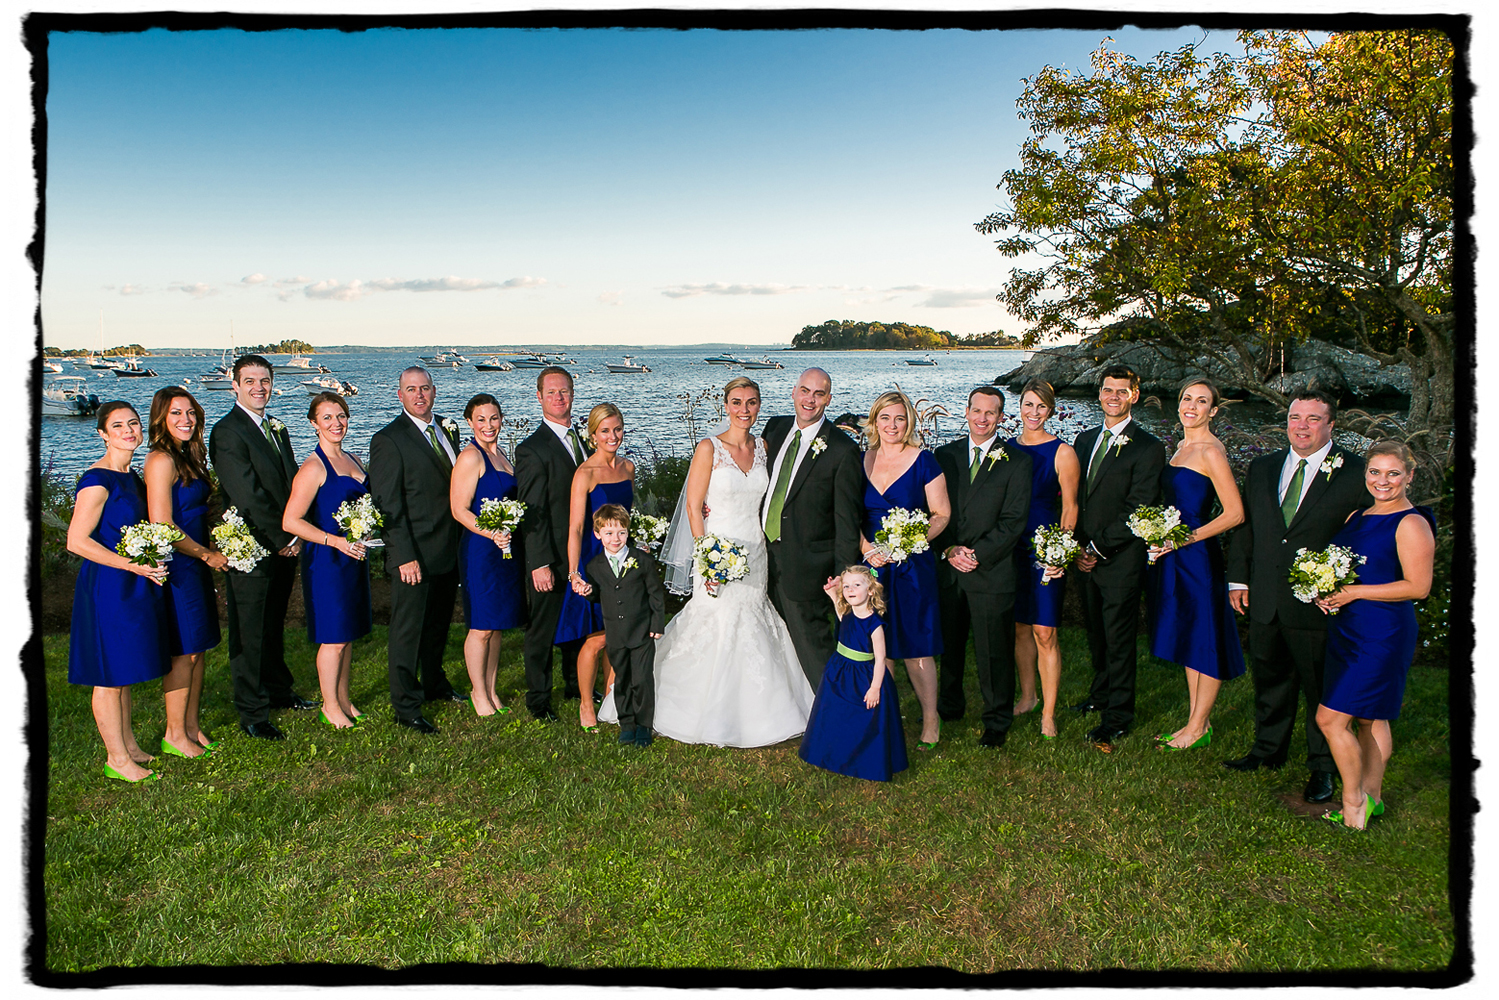 This wedding party was perfect in blue in the yacht club setting of Belle Haven Club in Greenwich, Connecticut.